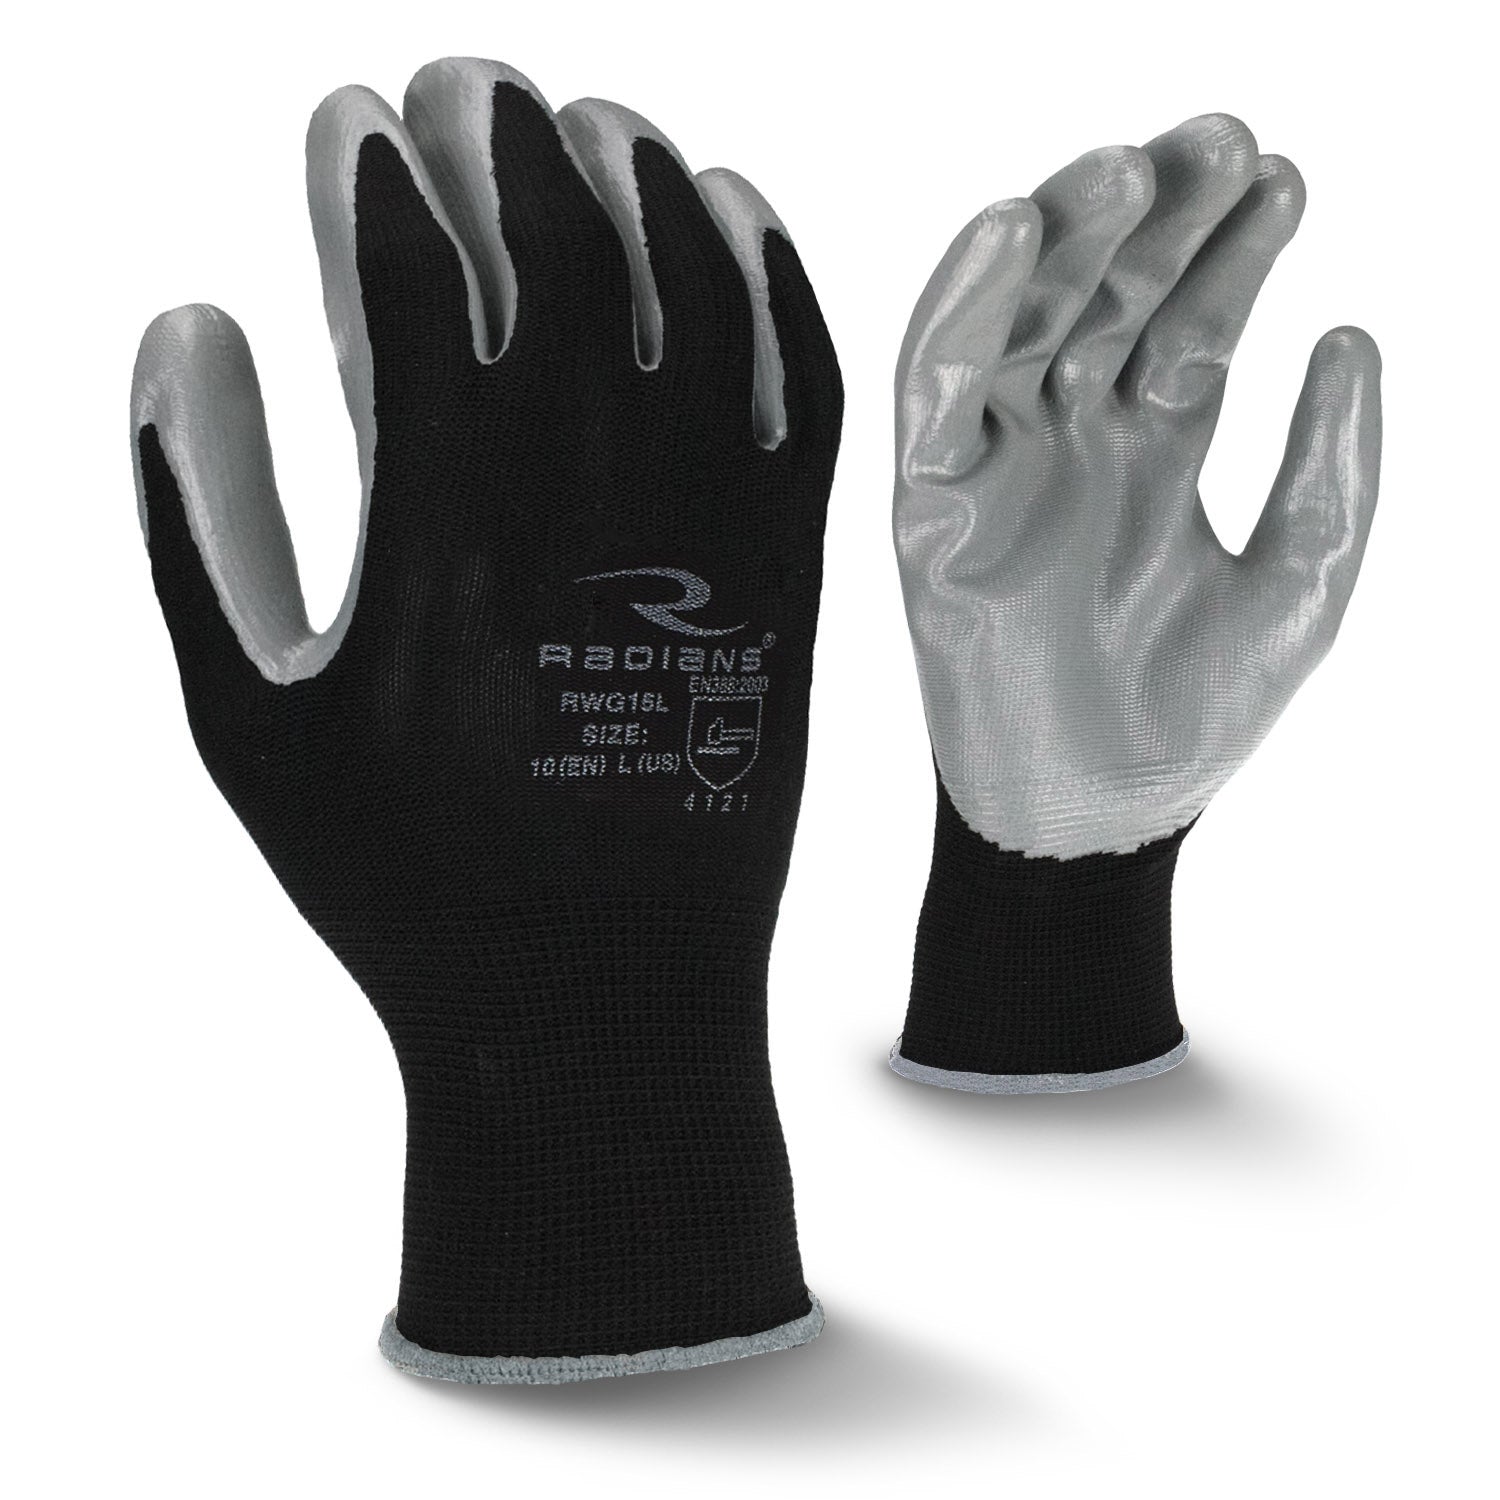 Radians RWG15 Smooth Nitrile Palm Coated Glove-eSafety Supplies, Inc